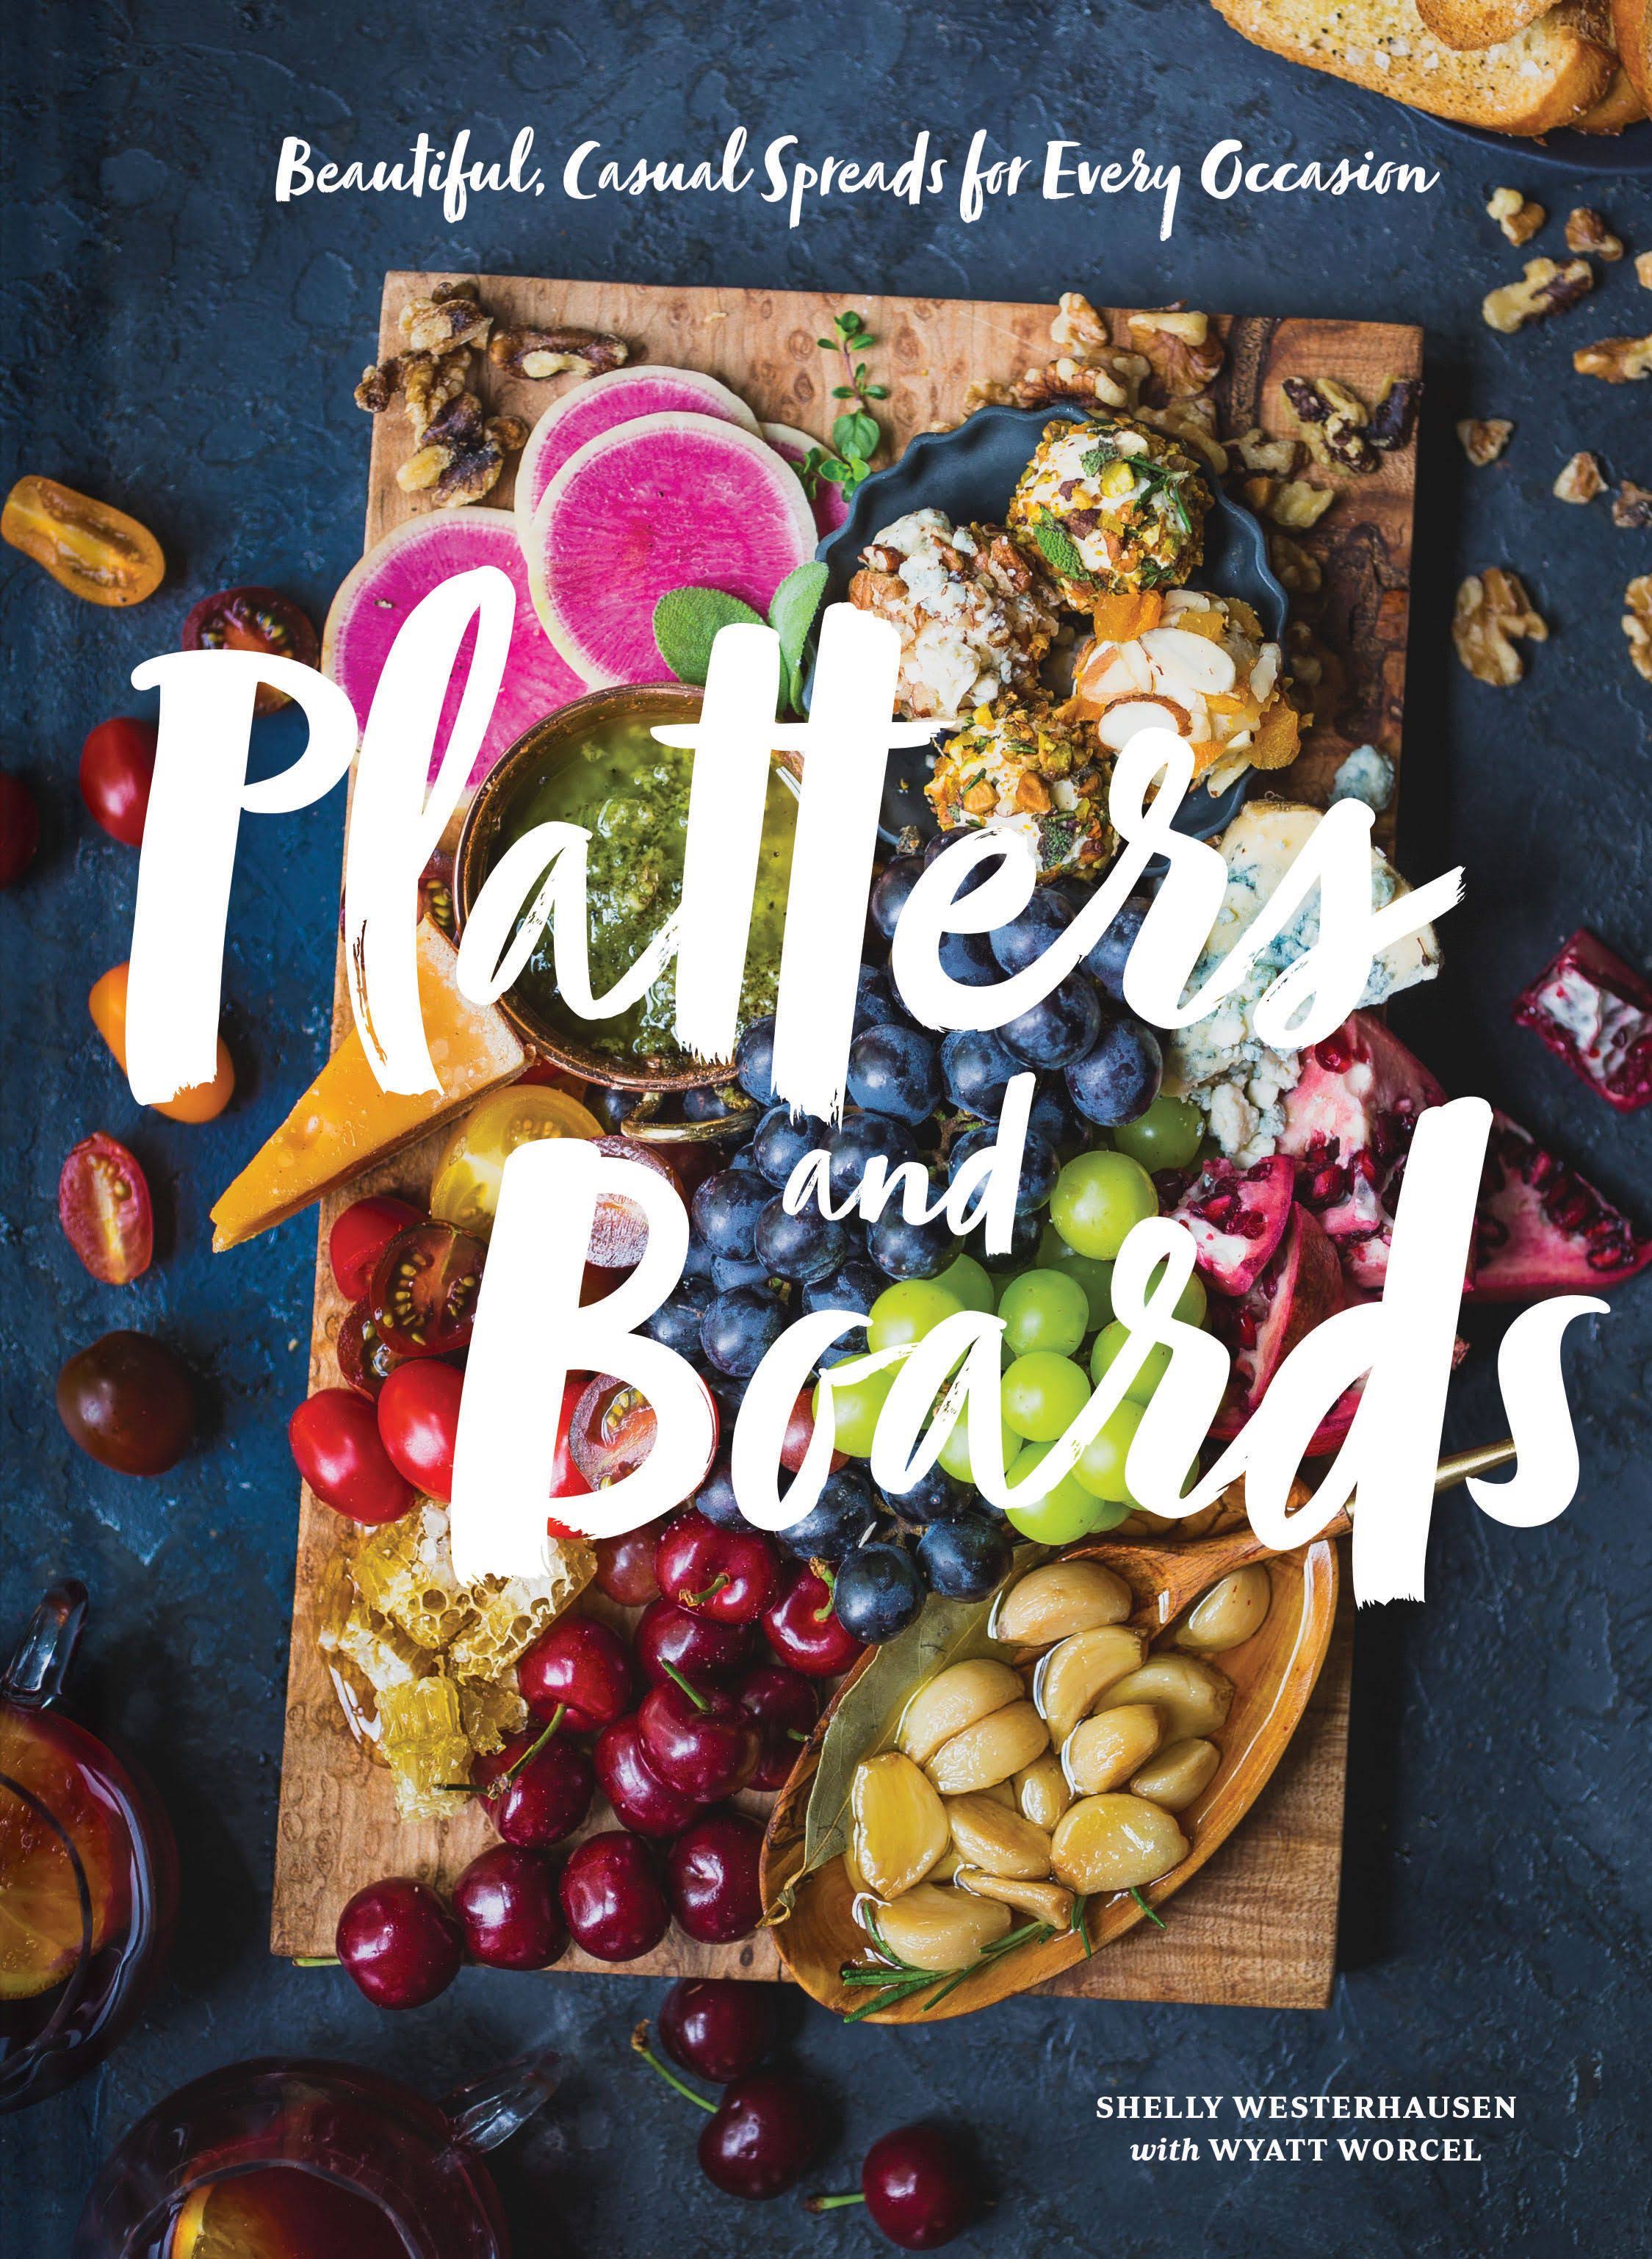 Platters and Boards: Beautiful, Casual Spreads for Every Occasion (Appetizer Cookbooks, Dinner Party Planning Books, Food Presentation Books) [Book]